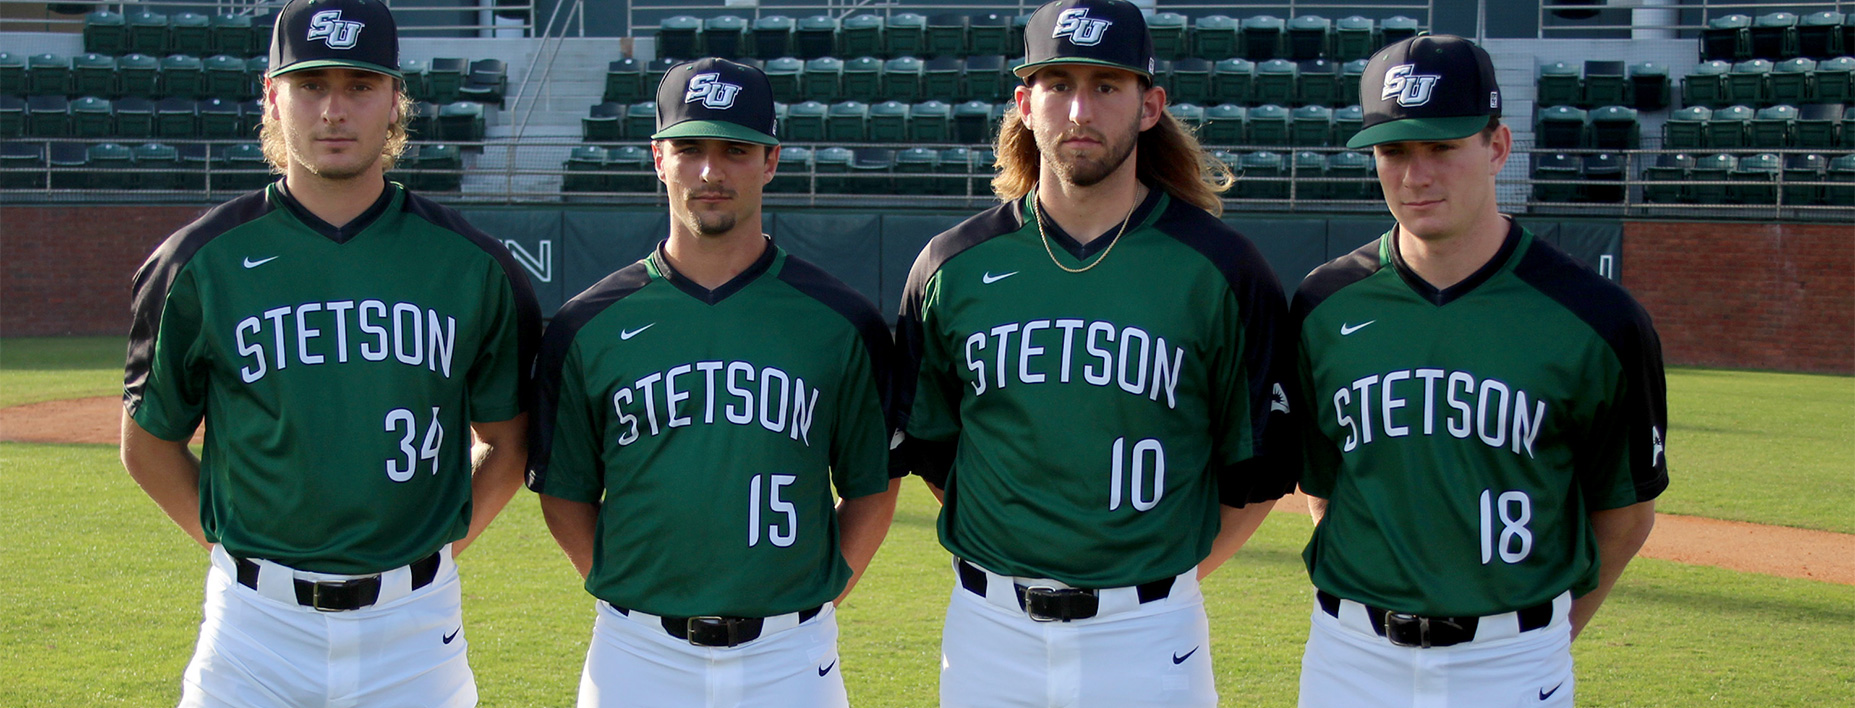 The four senior player stand side by side on the baseball field.